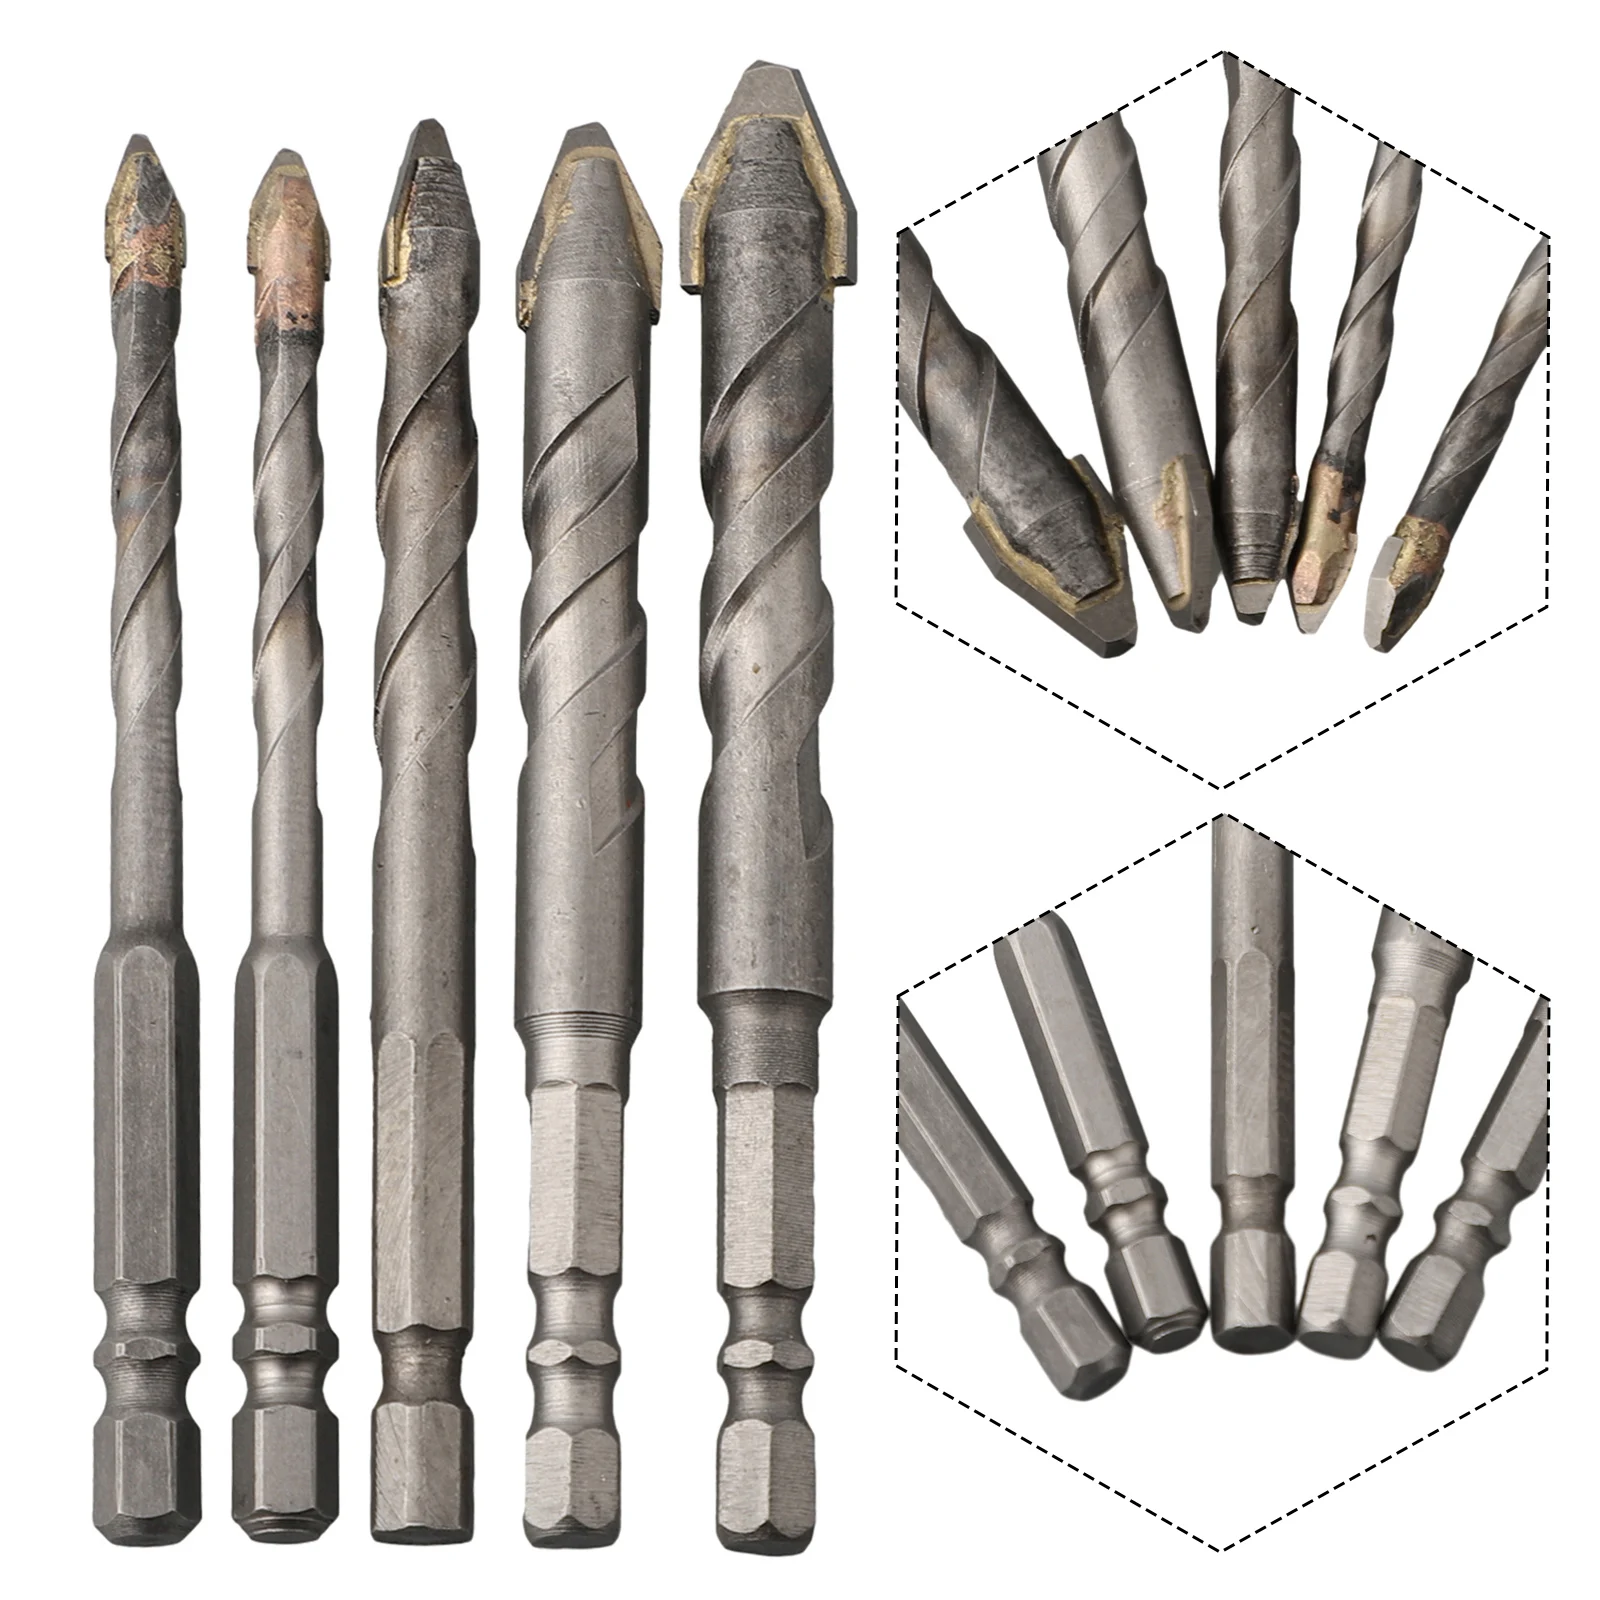 

Reliable Alloy Steel Drill Bit Set Conventional Hex Shank Design Tight Grip Suitable for Plastics Wood and More